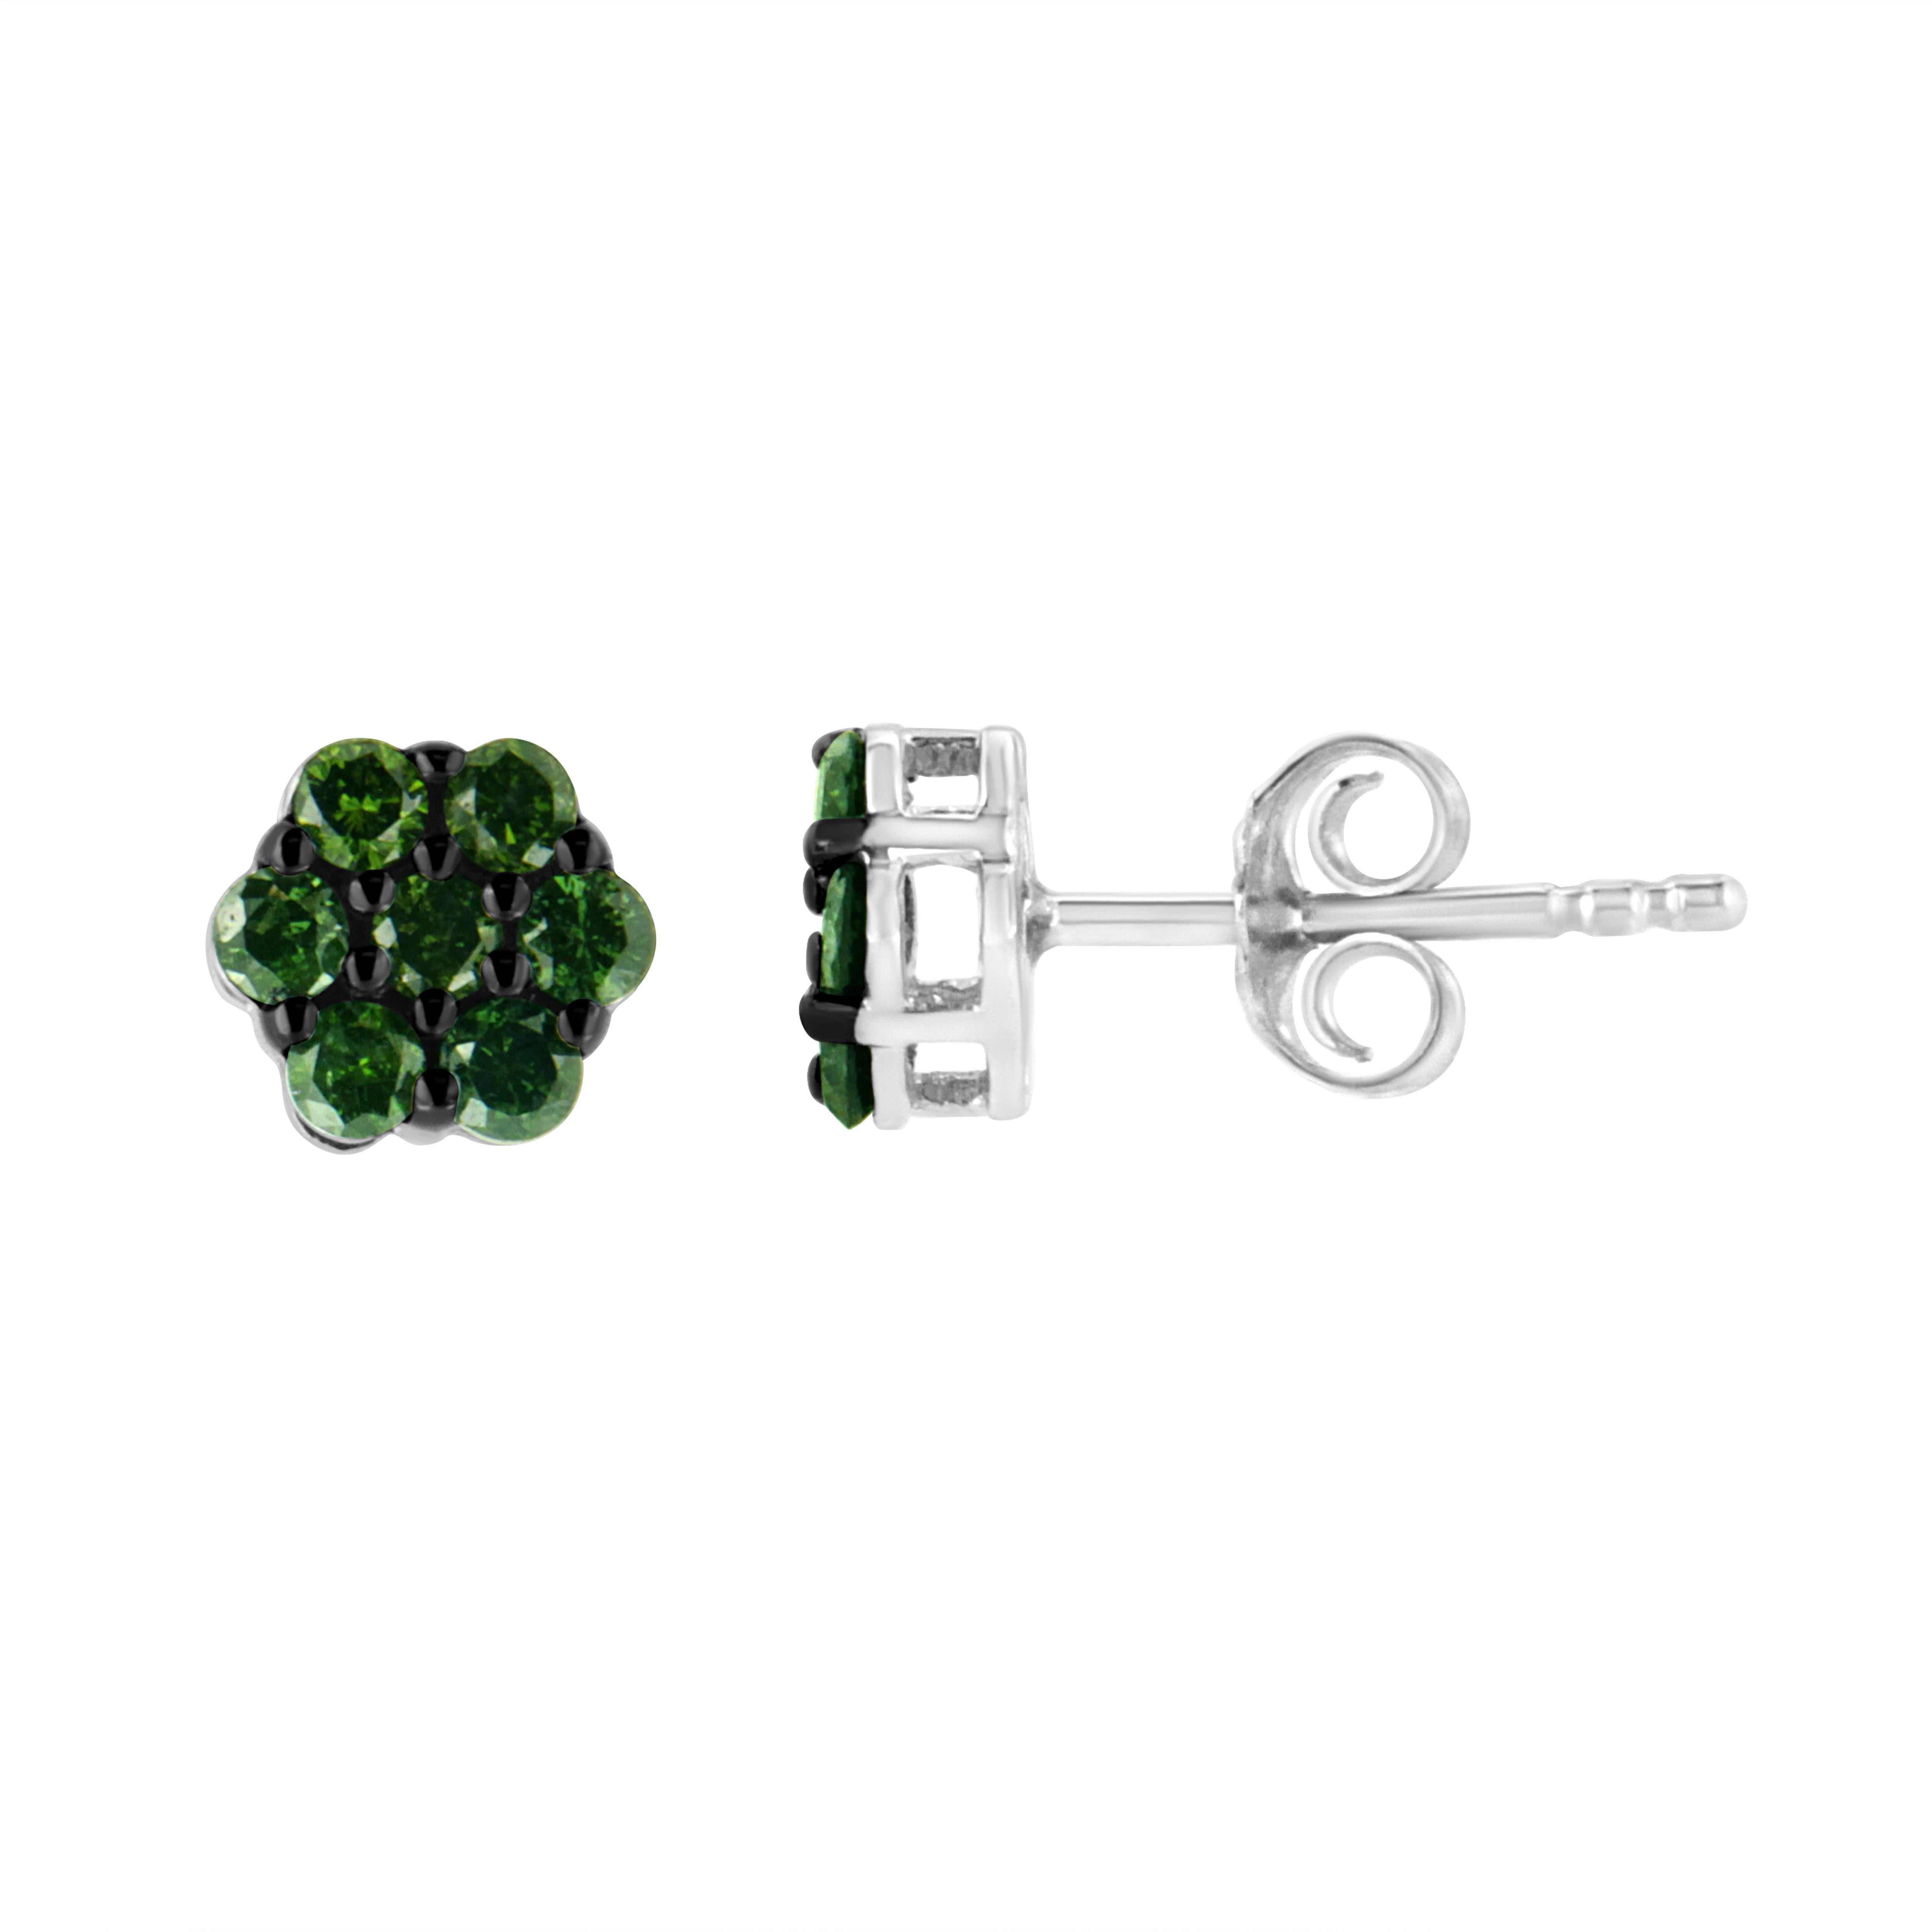 You will fall in love with these classic cluster stud earrings. A must have for any serious jewelry collection, these .925 sterling earrings boast an impressive 4.0 carat total weight of treated green diamonds with seven stones each. The earrings